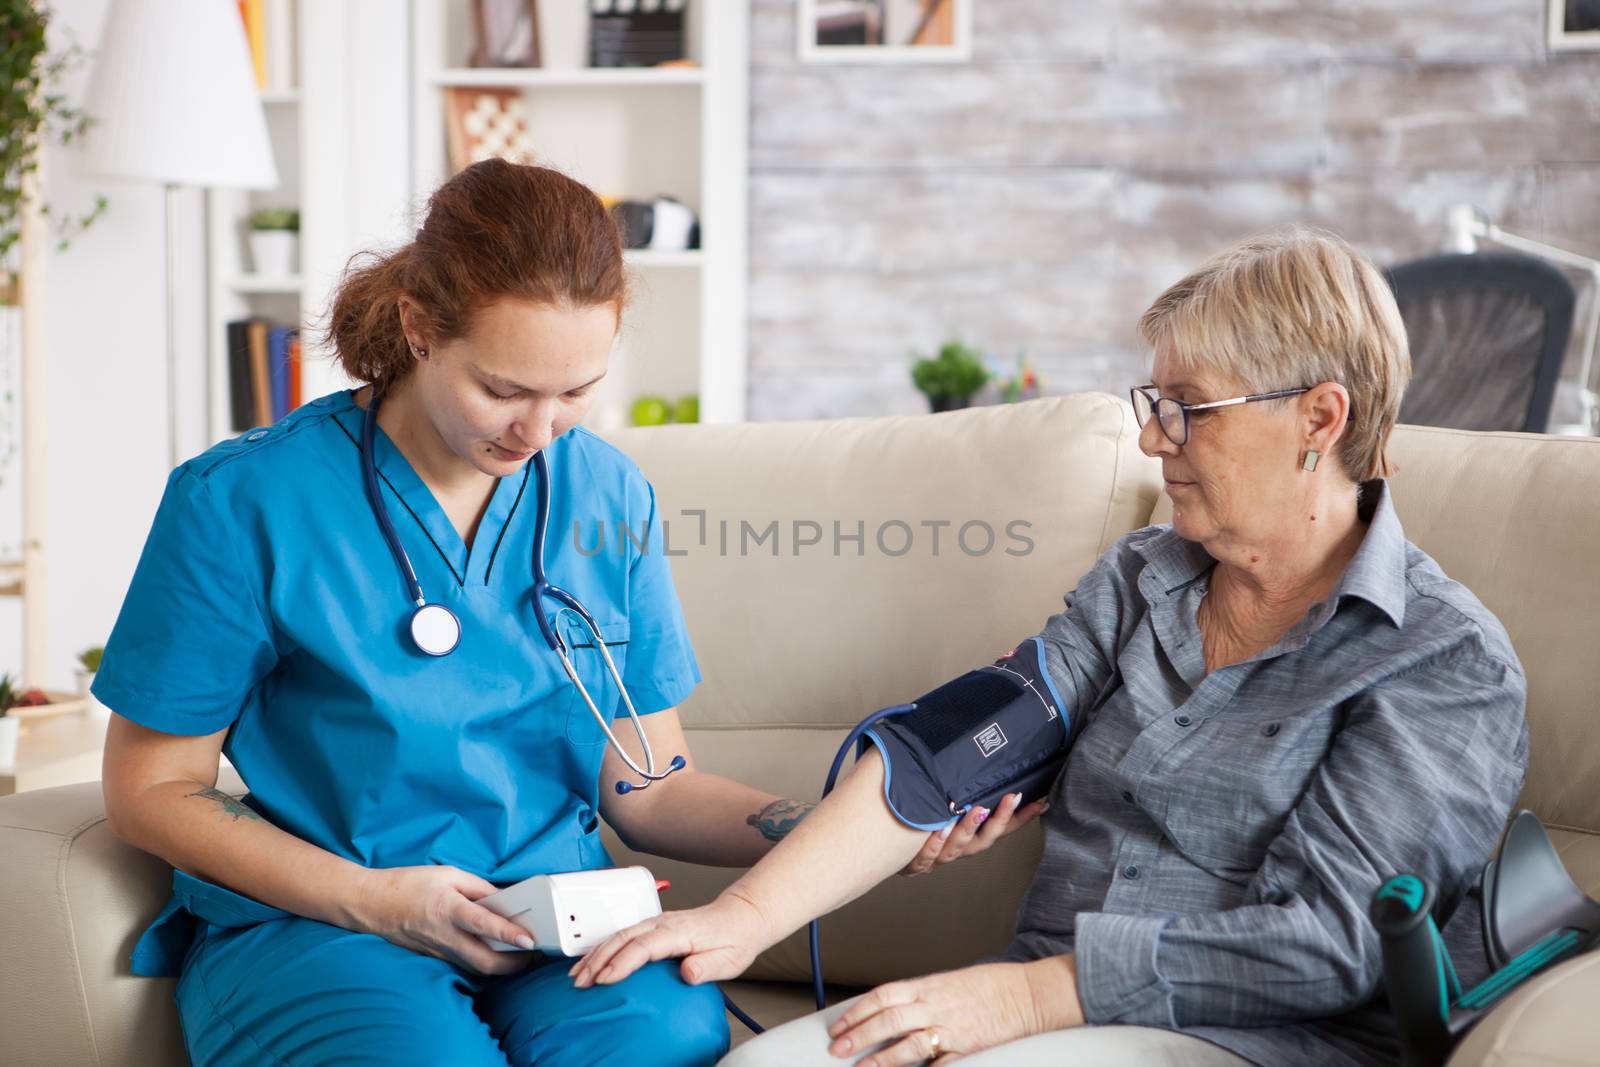 Nurse sitting on couch with old woman in nursing home checking her blood pressure with digital device.